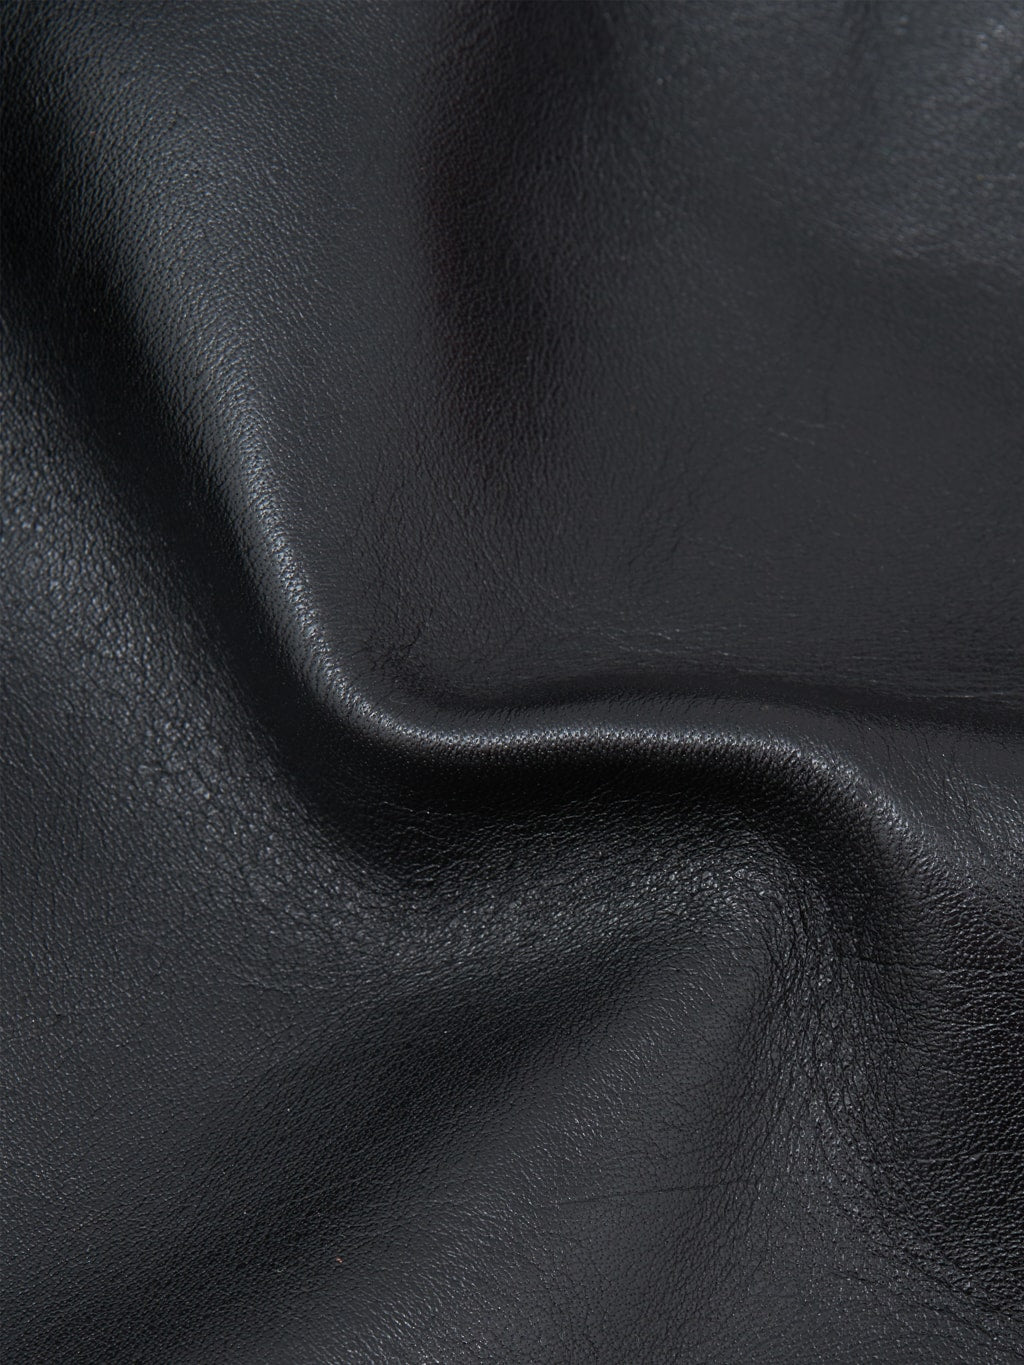 The Flat Head Horsehide leather double Riders Jacket Black Semi Aniline texture